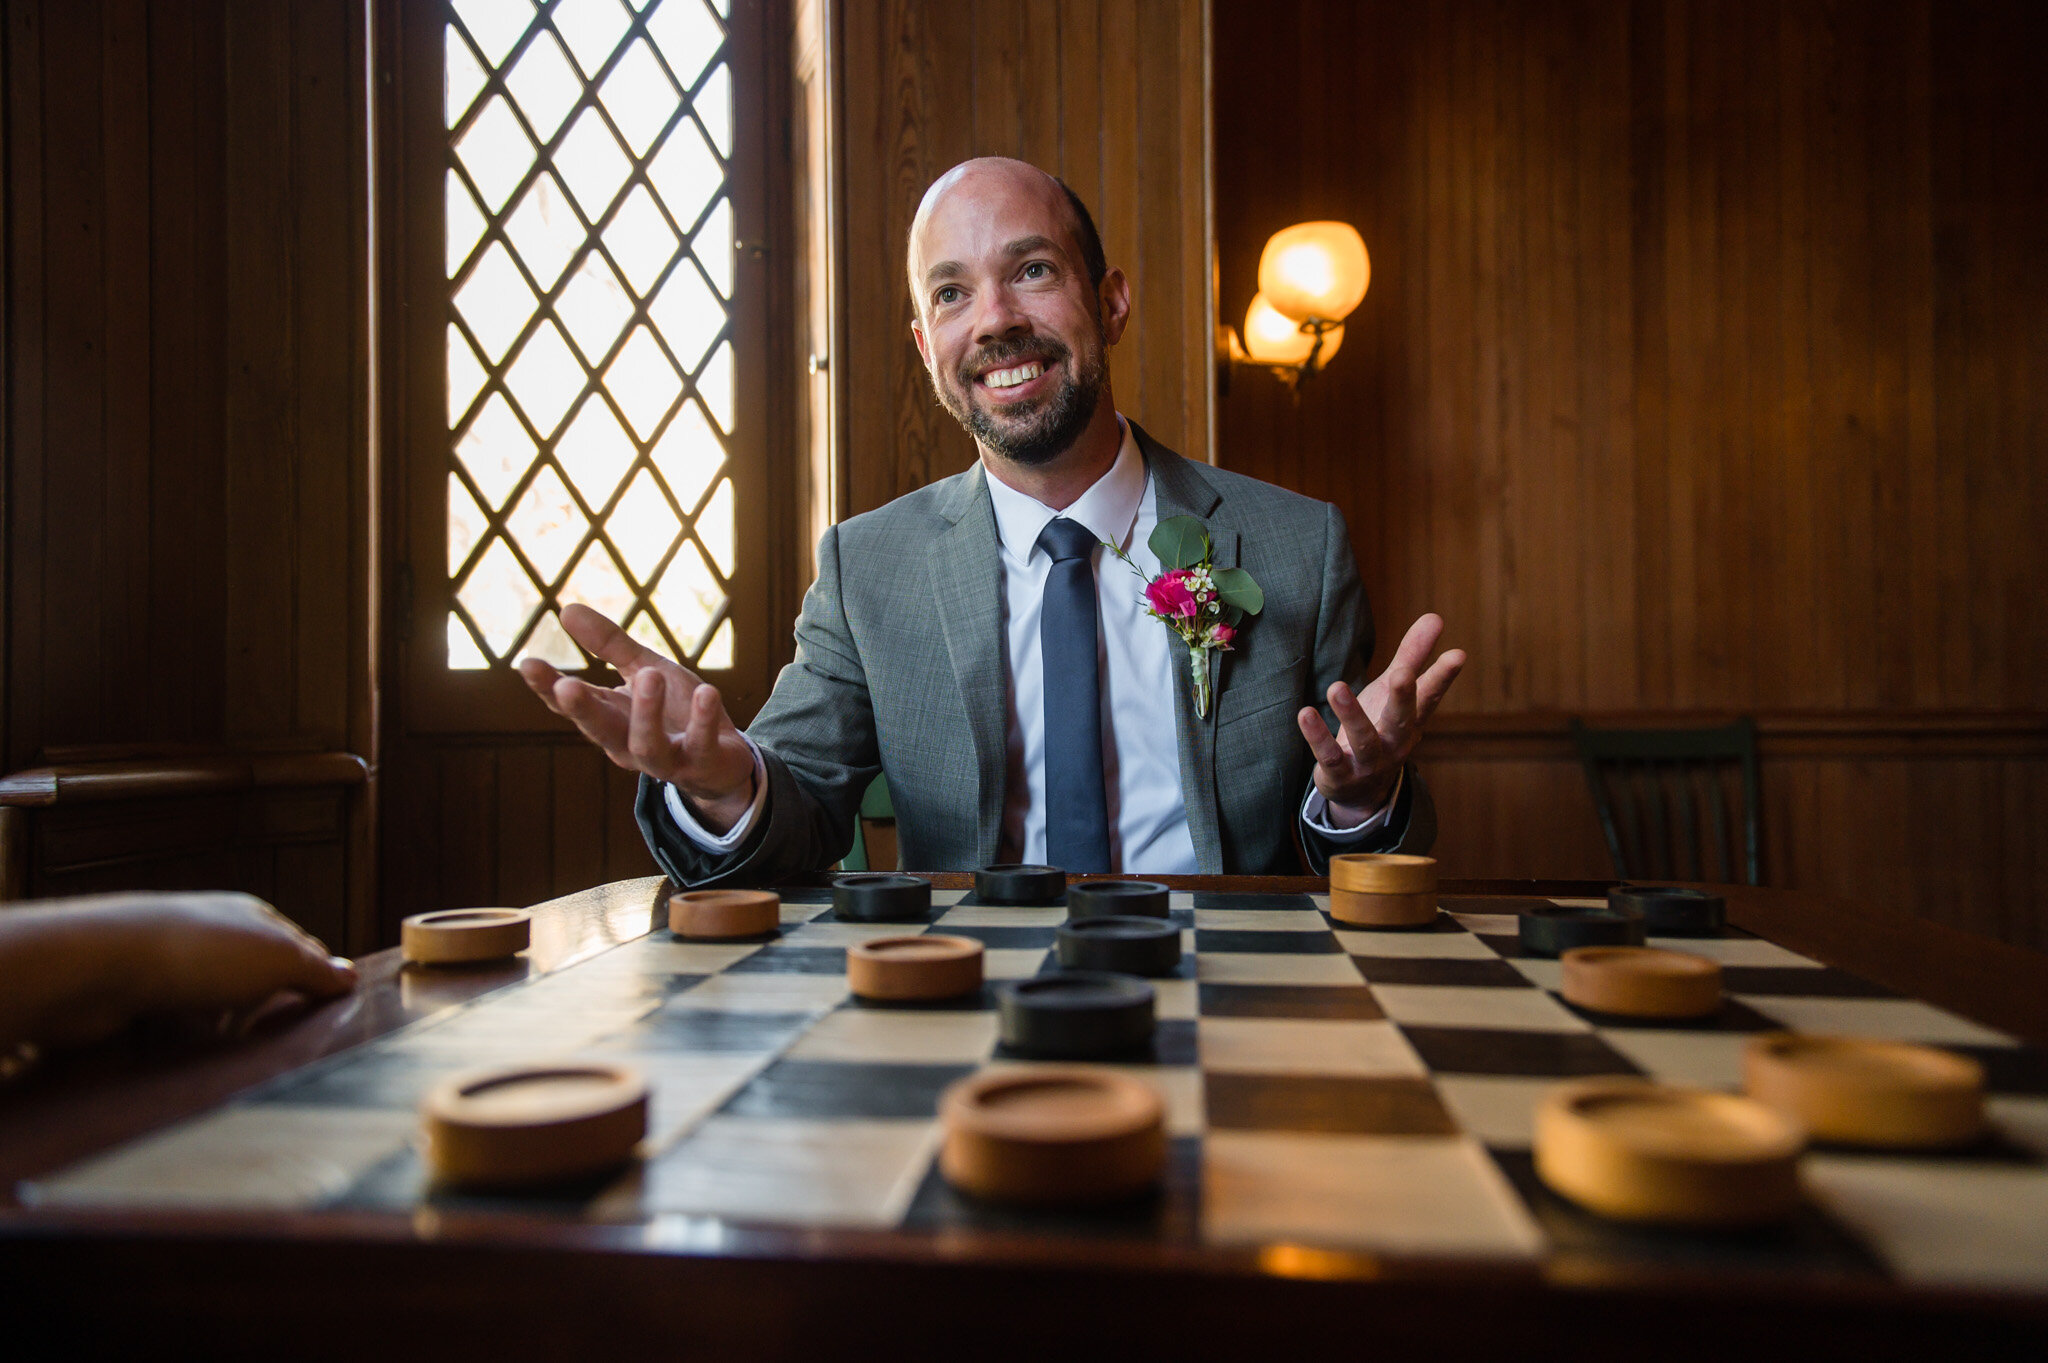 groom playing checkers